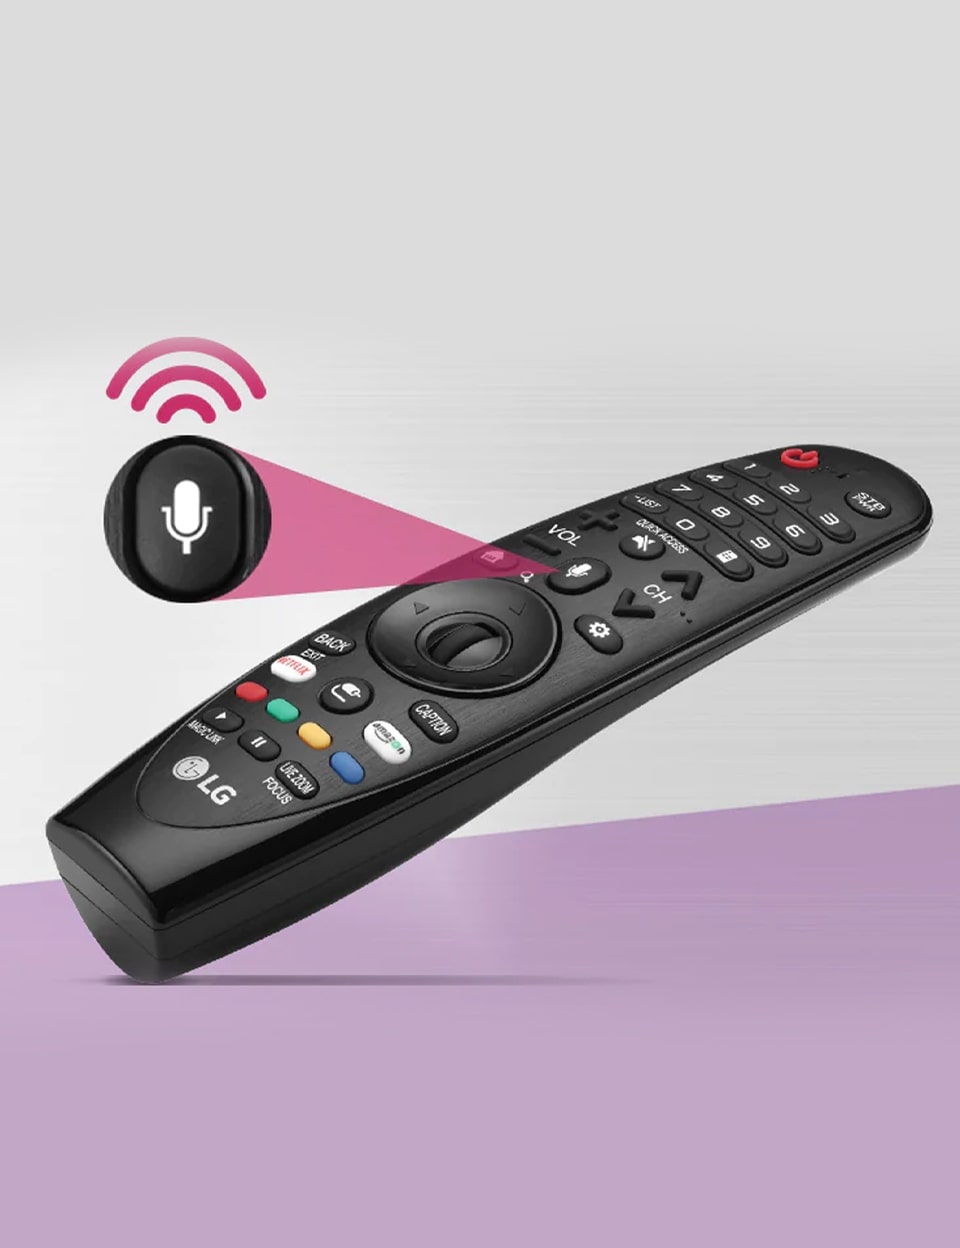 TV remotes with voice controls are assistive technology.